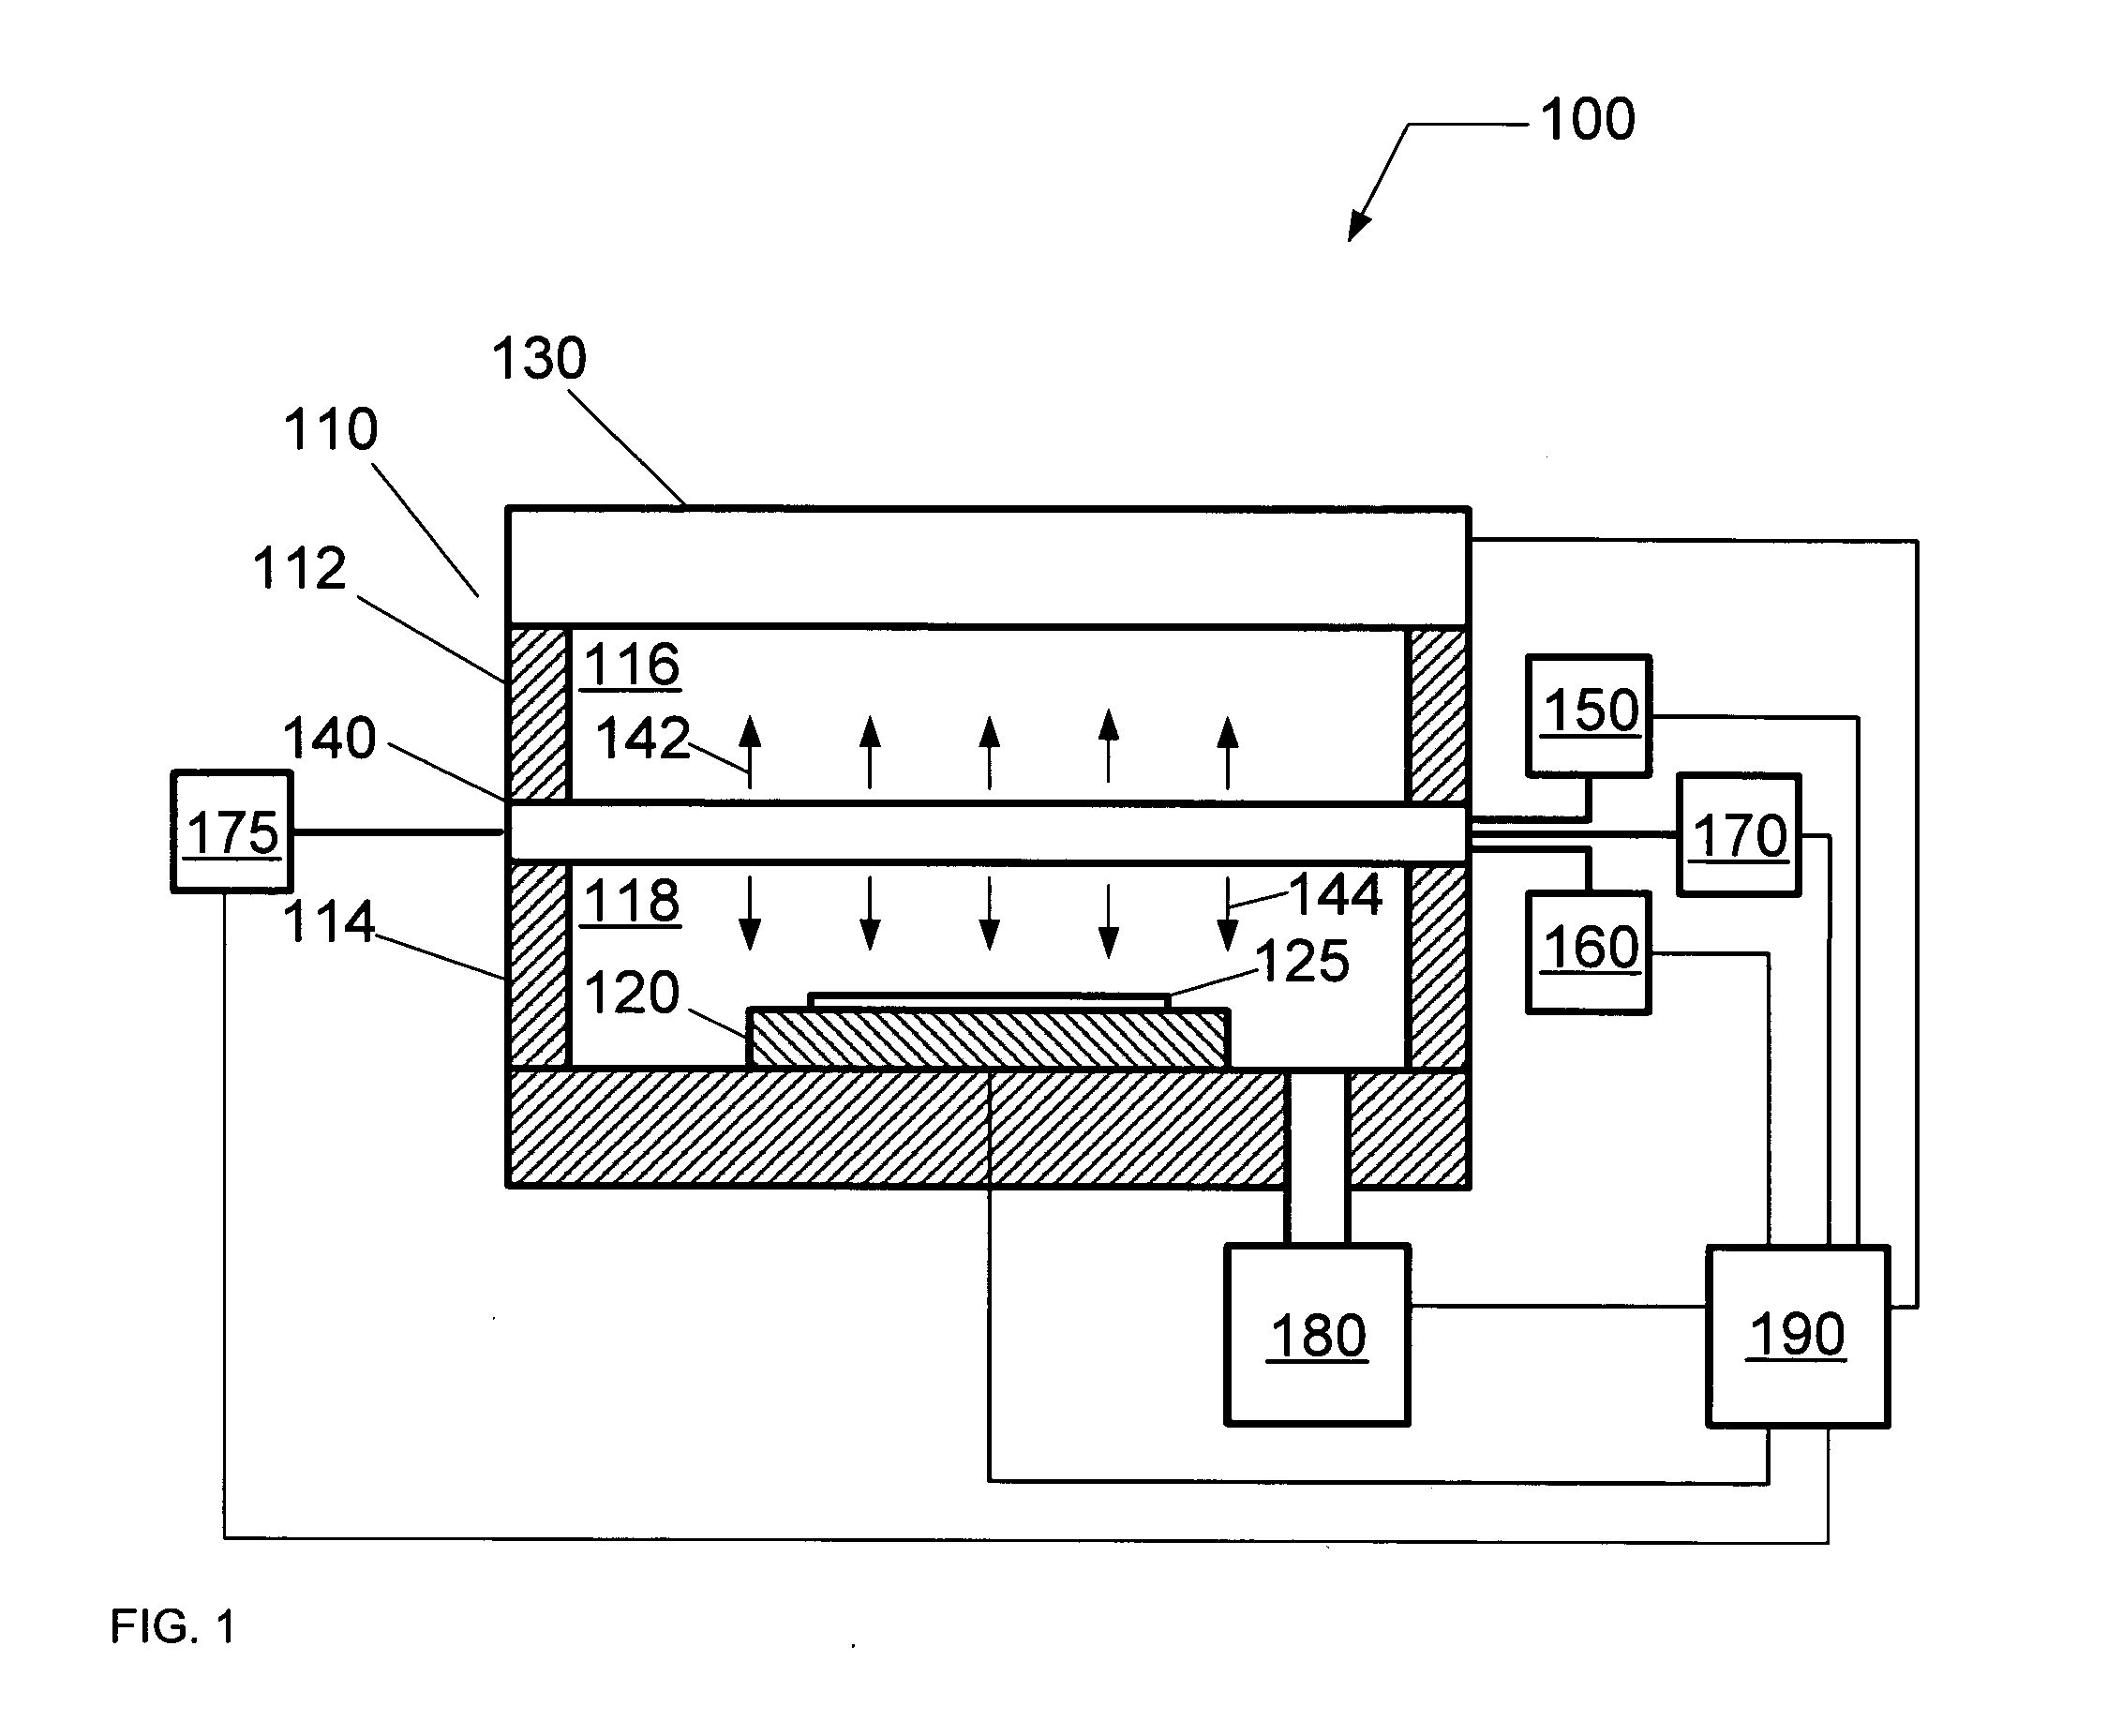 Plasma processing system for treating a substrate